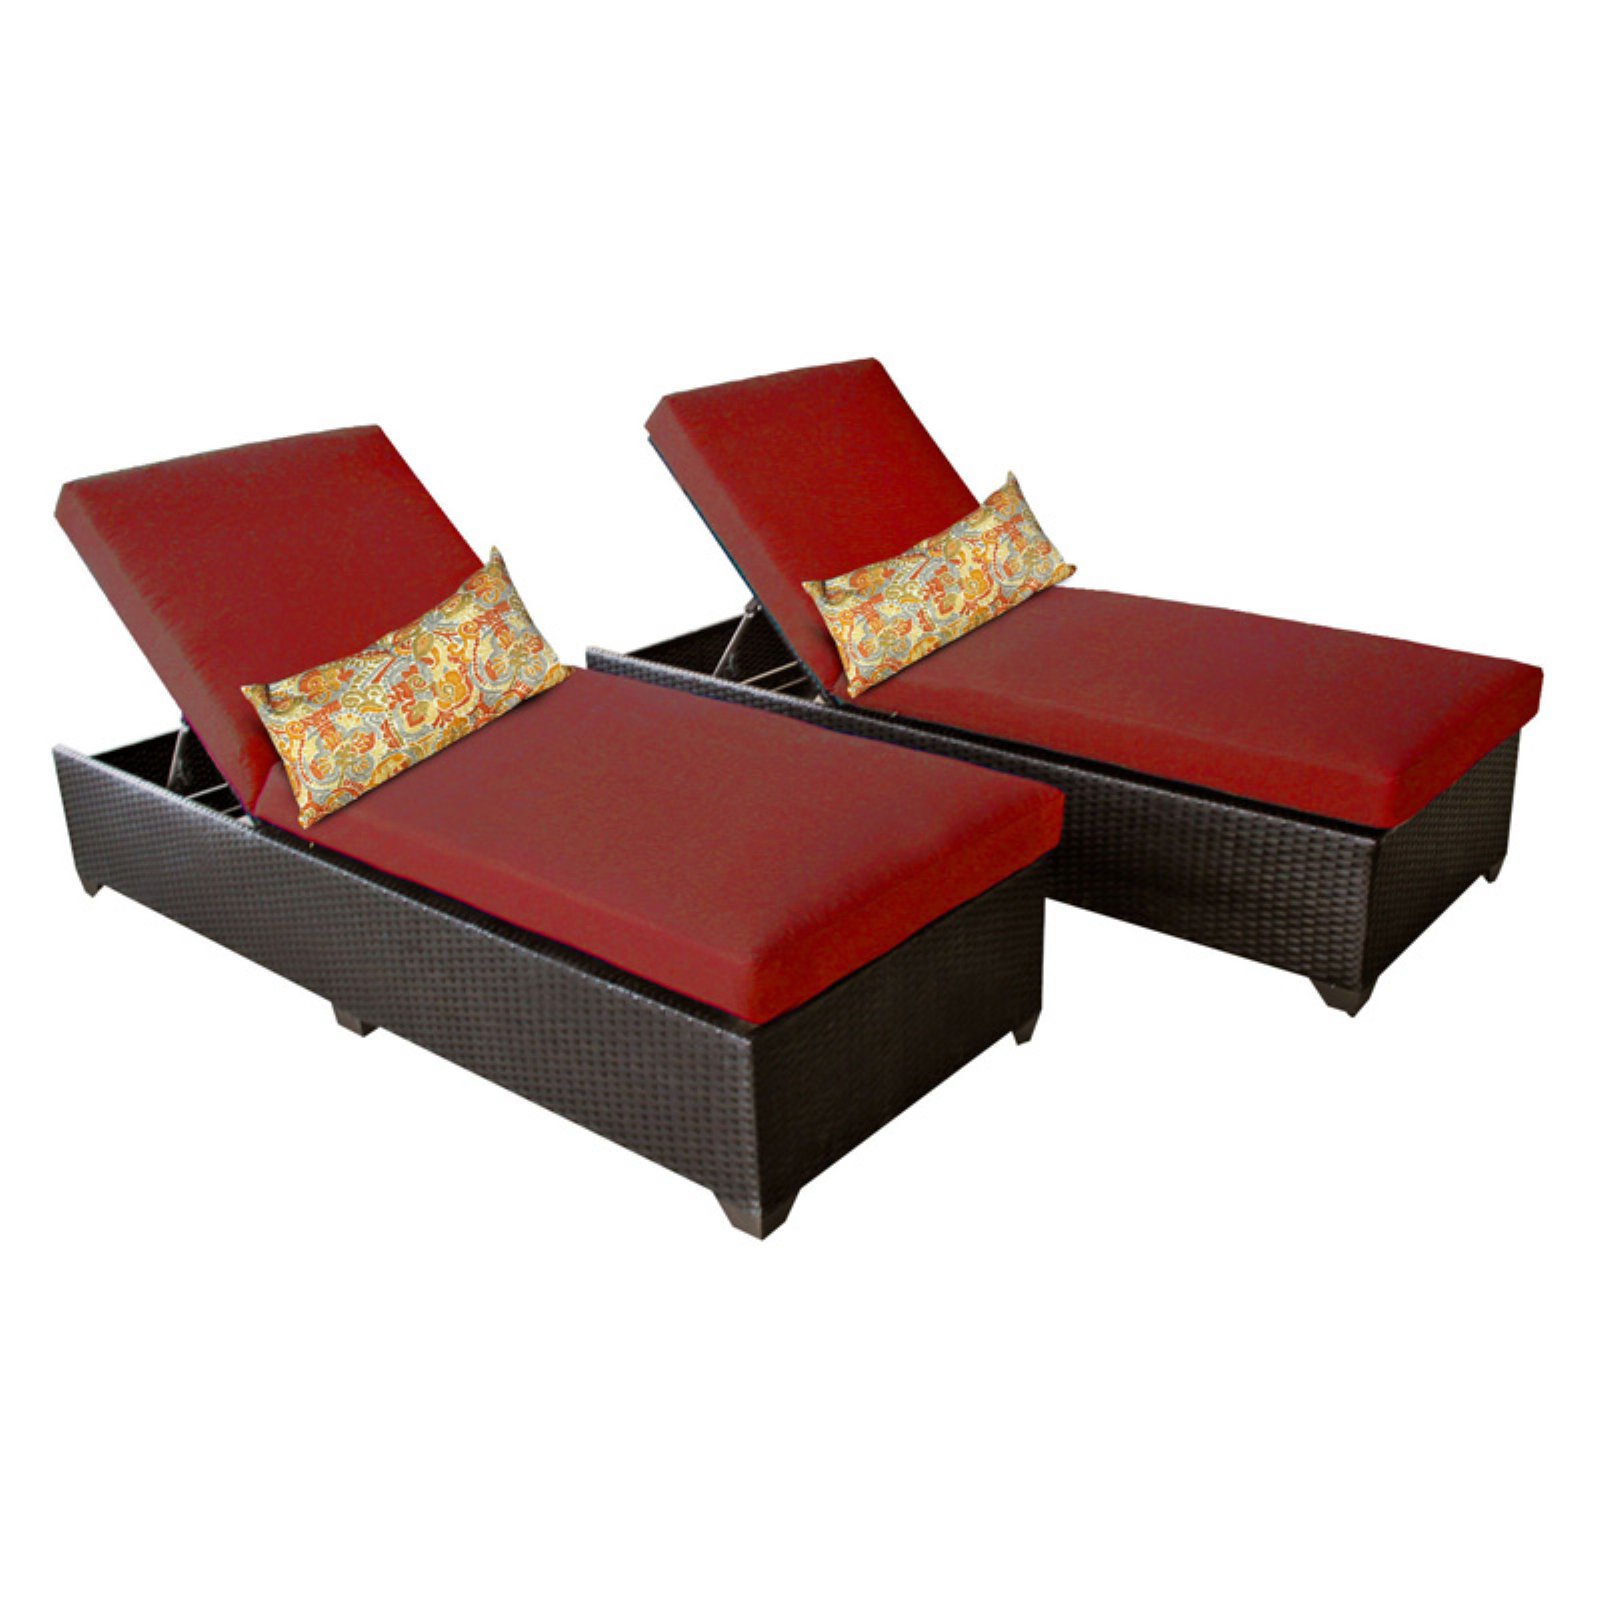 TK Classics Classic Outdoor Chaise Lounge - Set of 2 Chairs and Cushion Covers - image 1 of 2